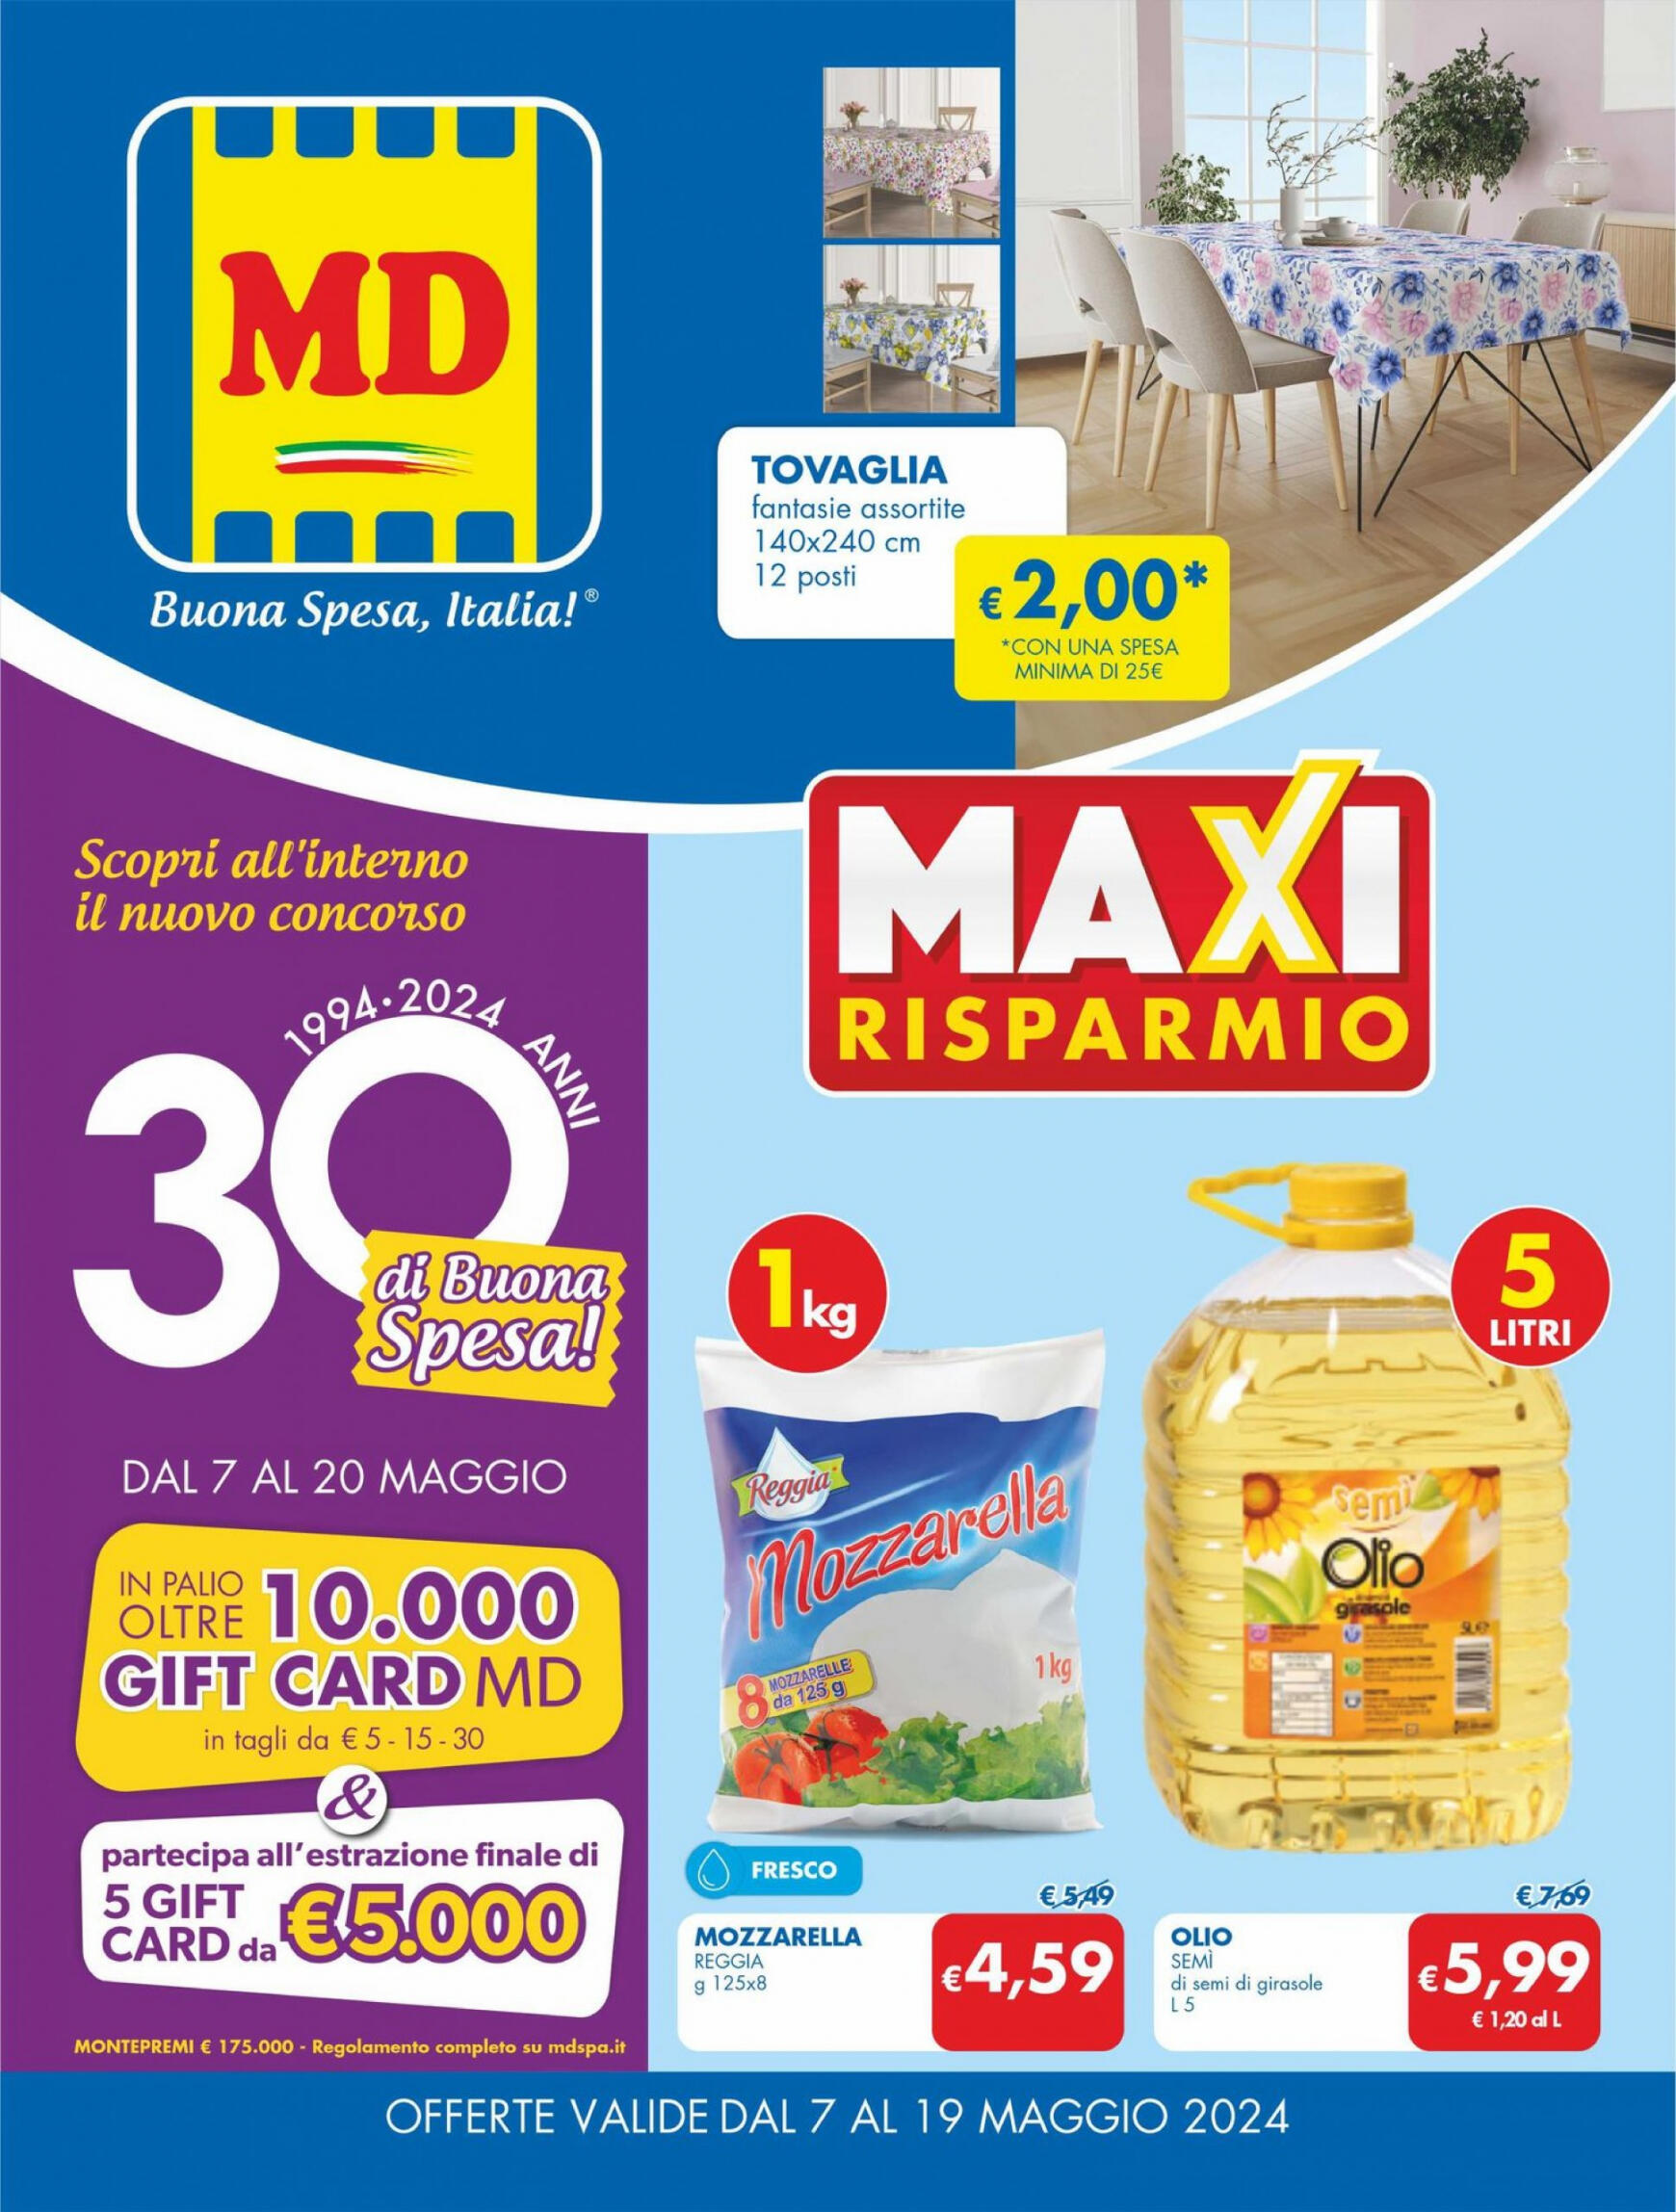 md-discount - Nuovo volantino MD - MD Discount 07.05. - 19.05. - page: 1